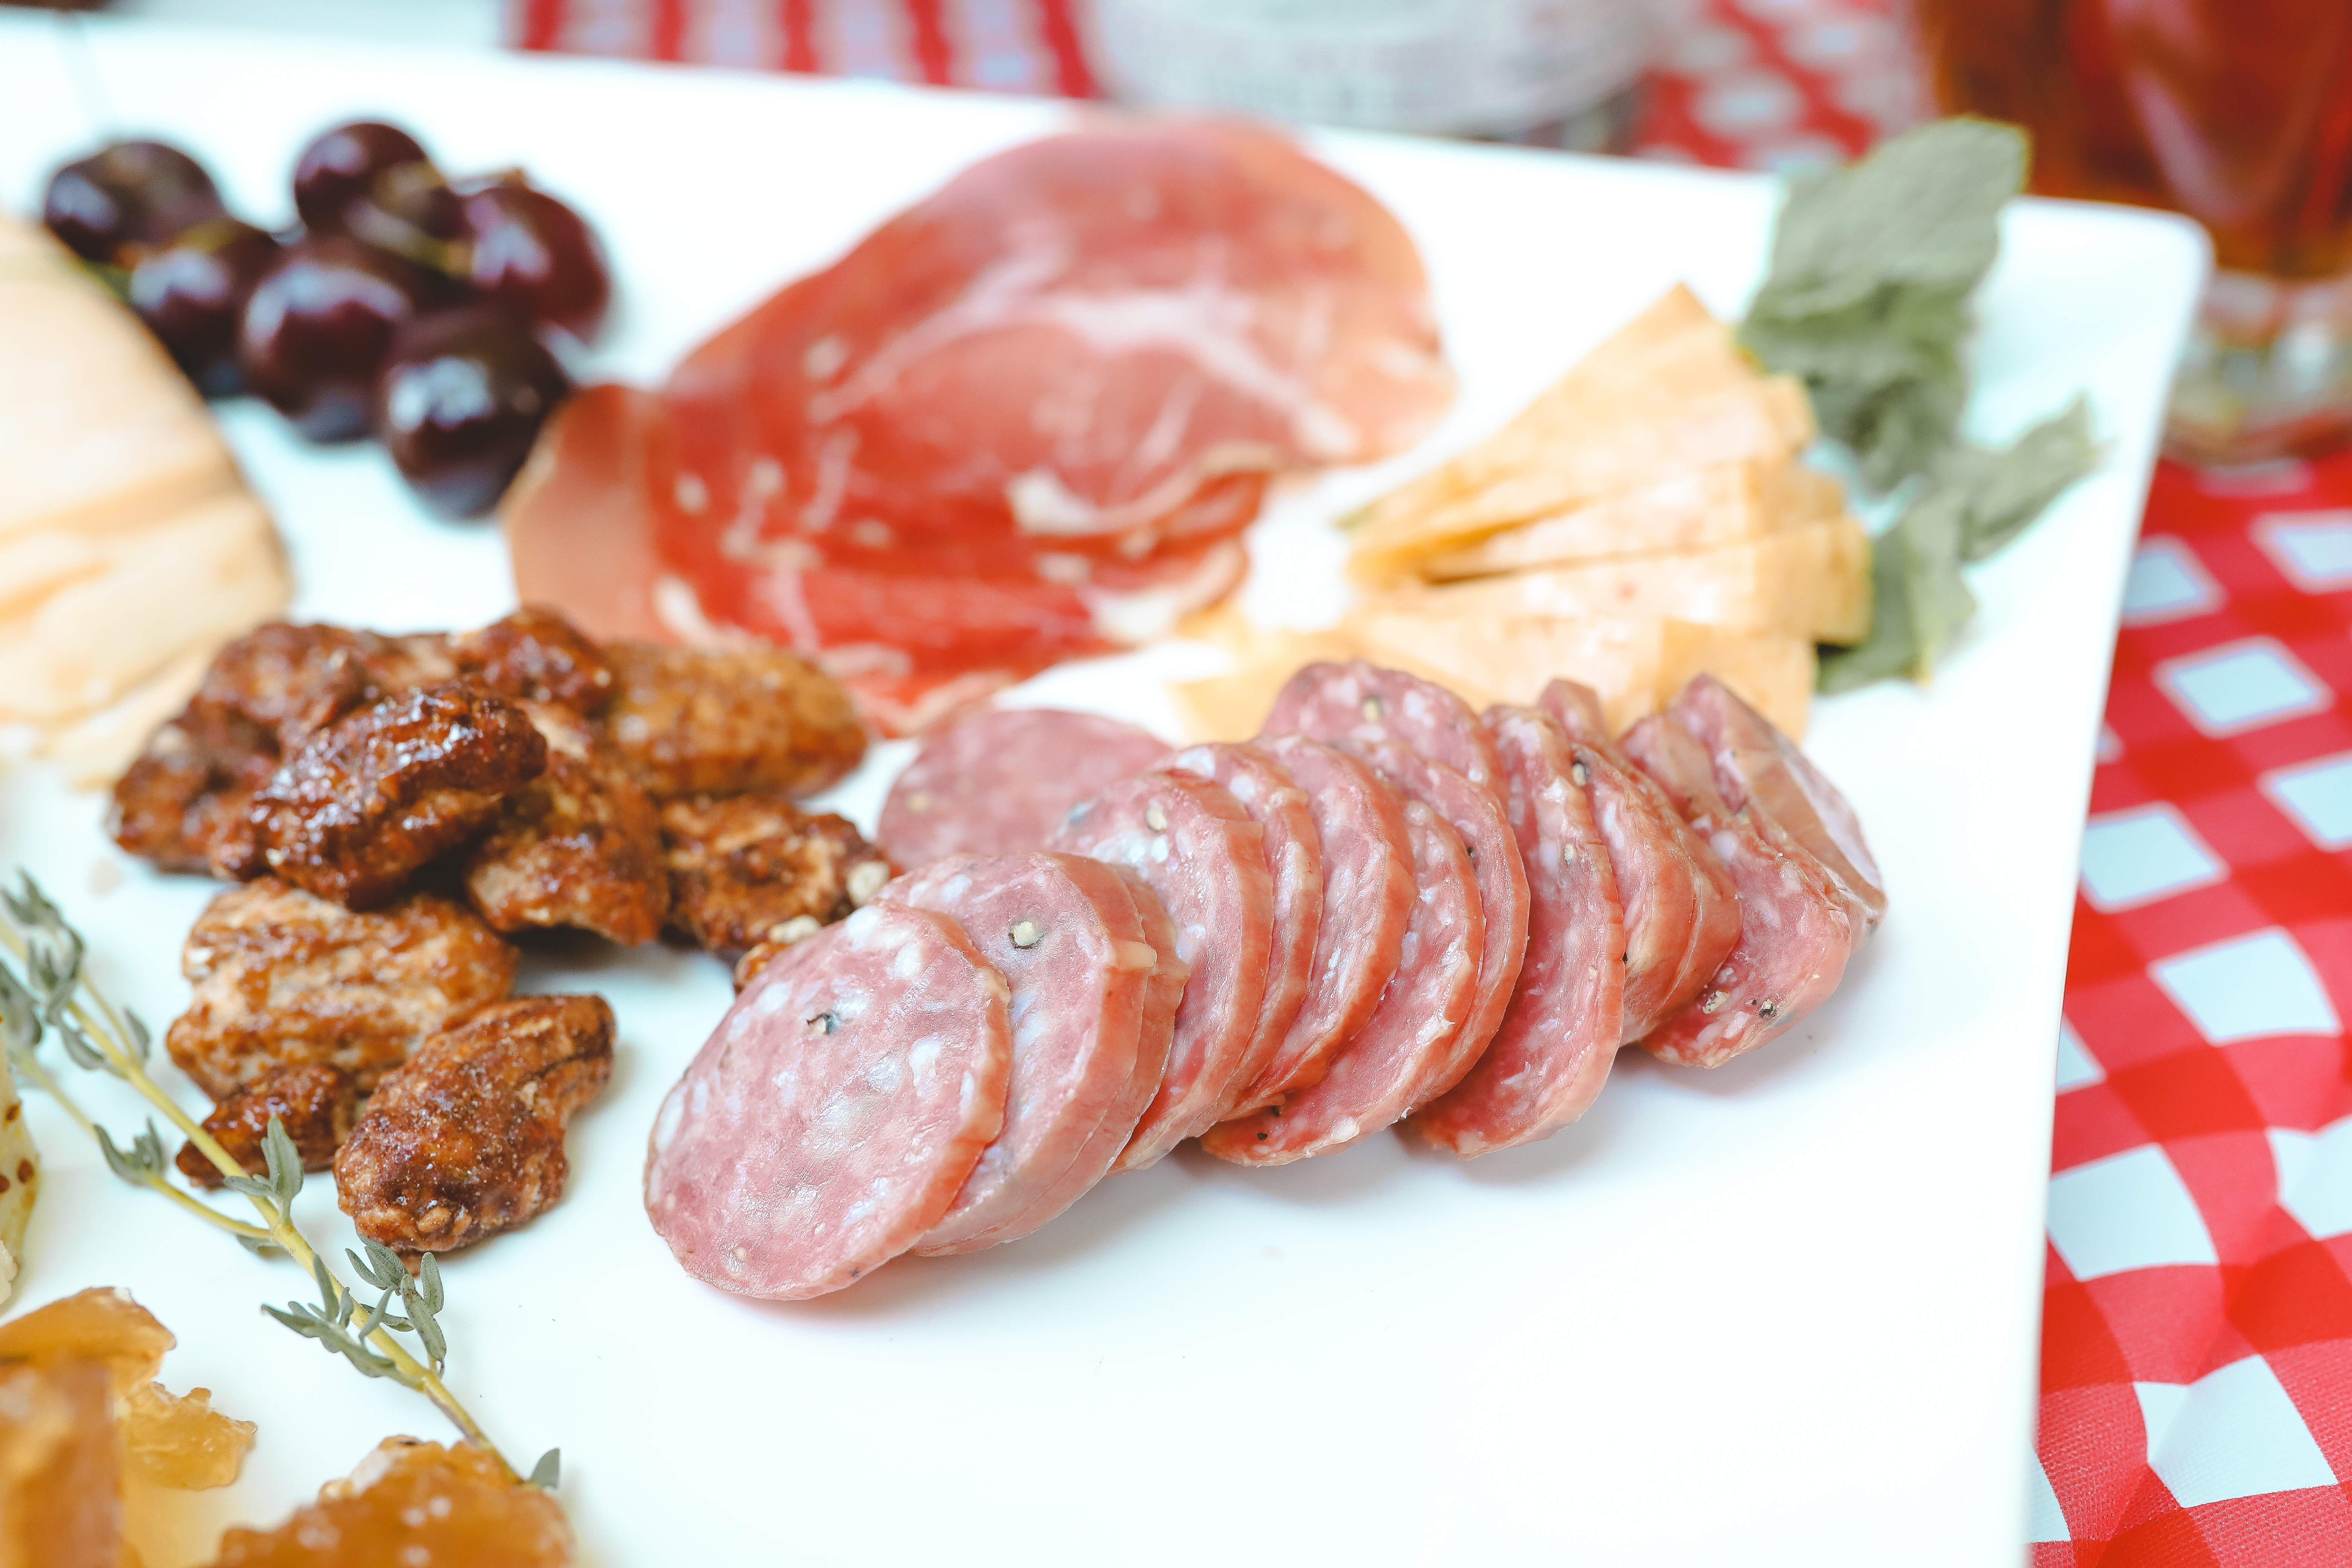 How to make a great Charcuterie and Cheese board